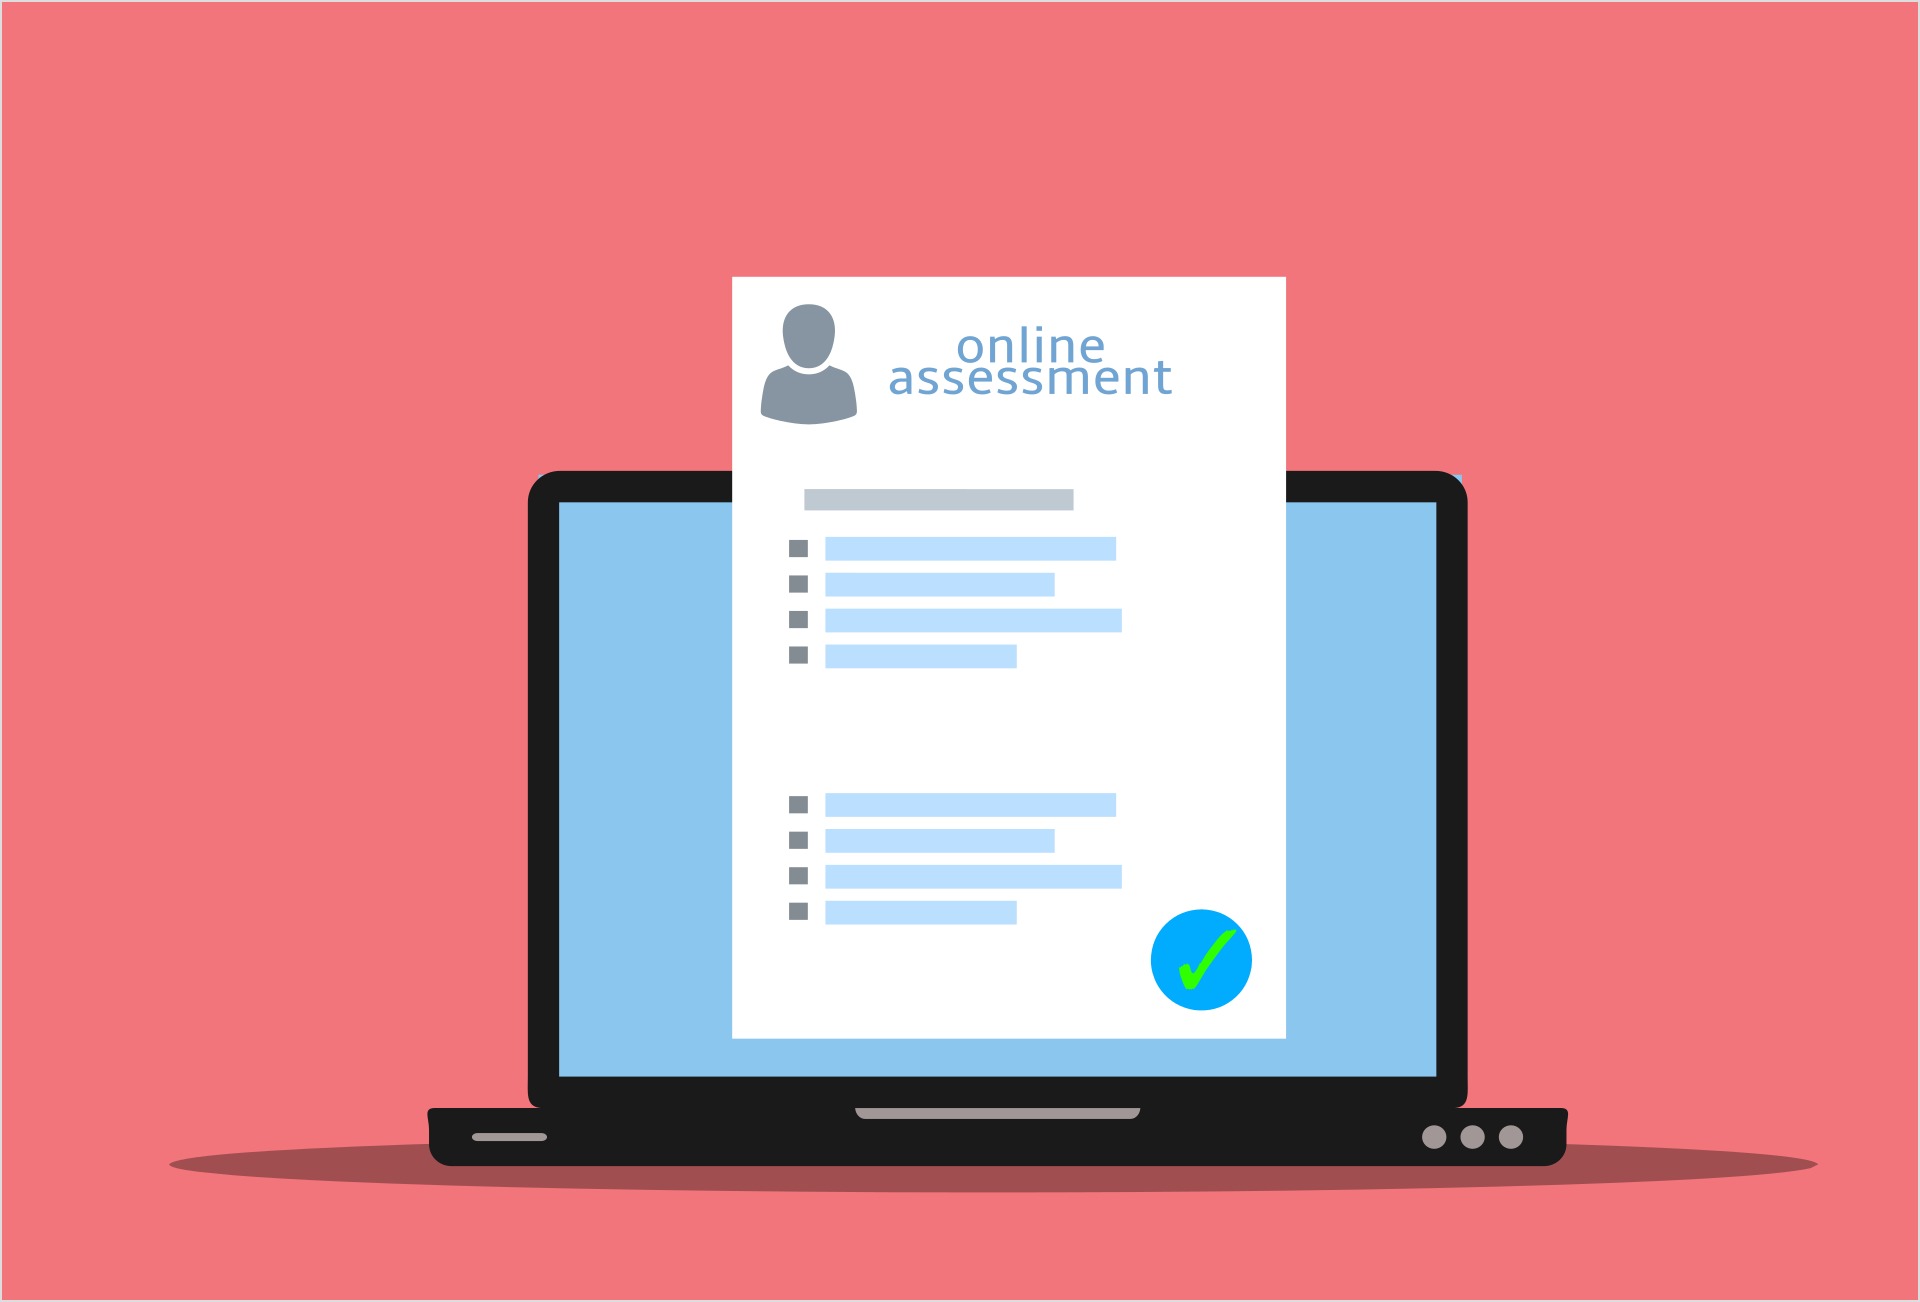 Online assessment in Onboarding process